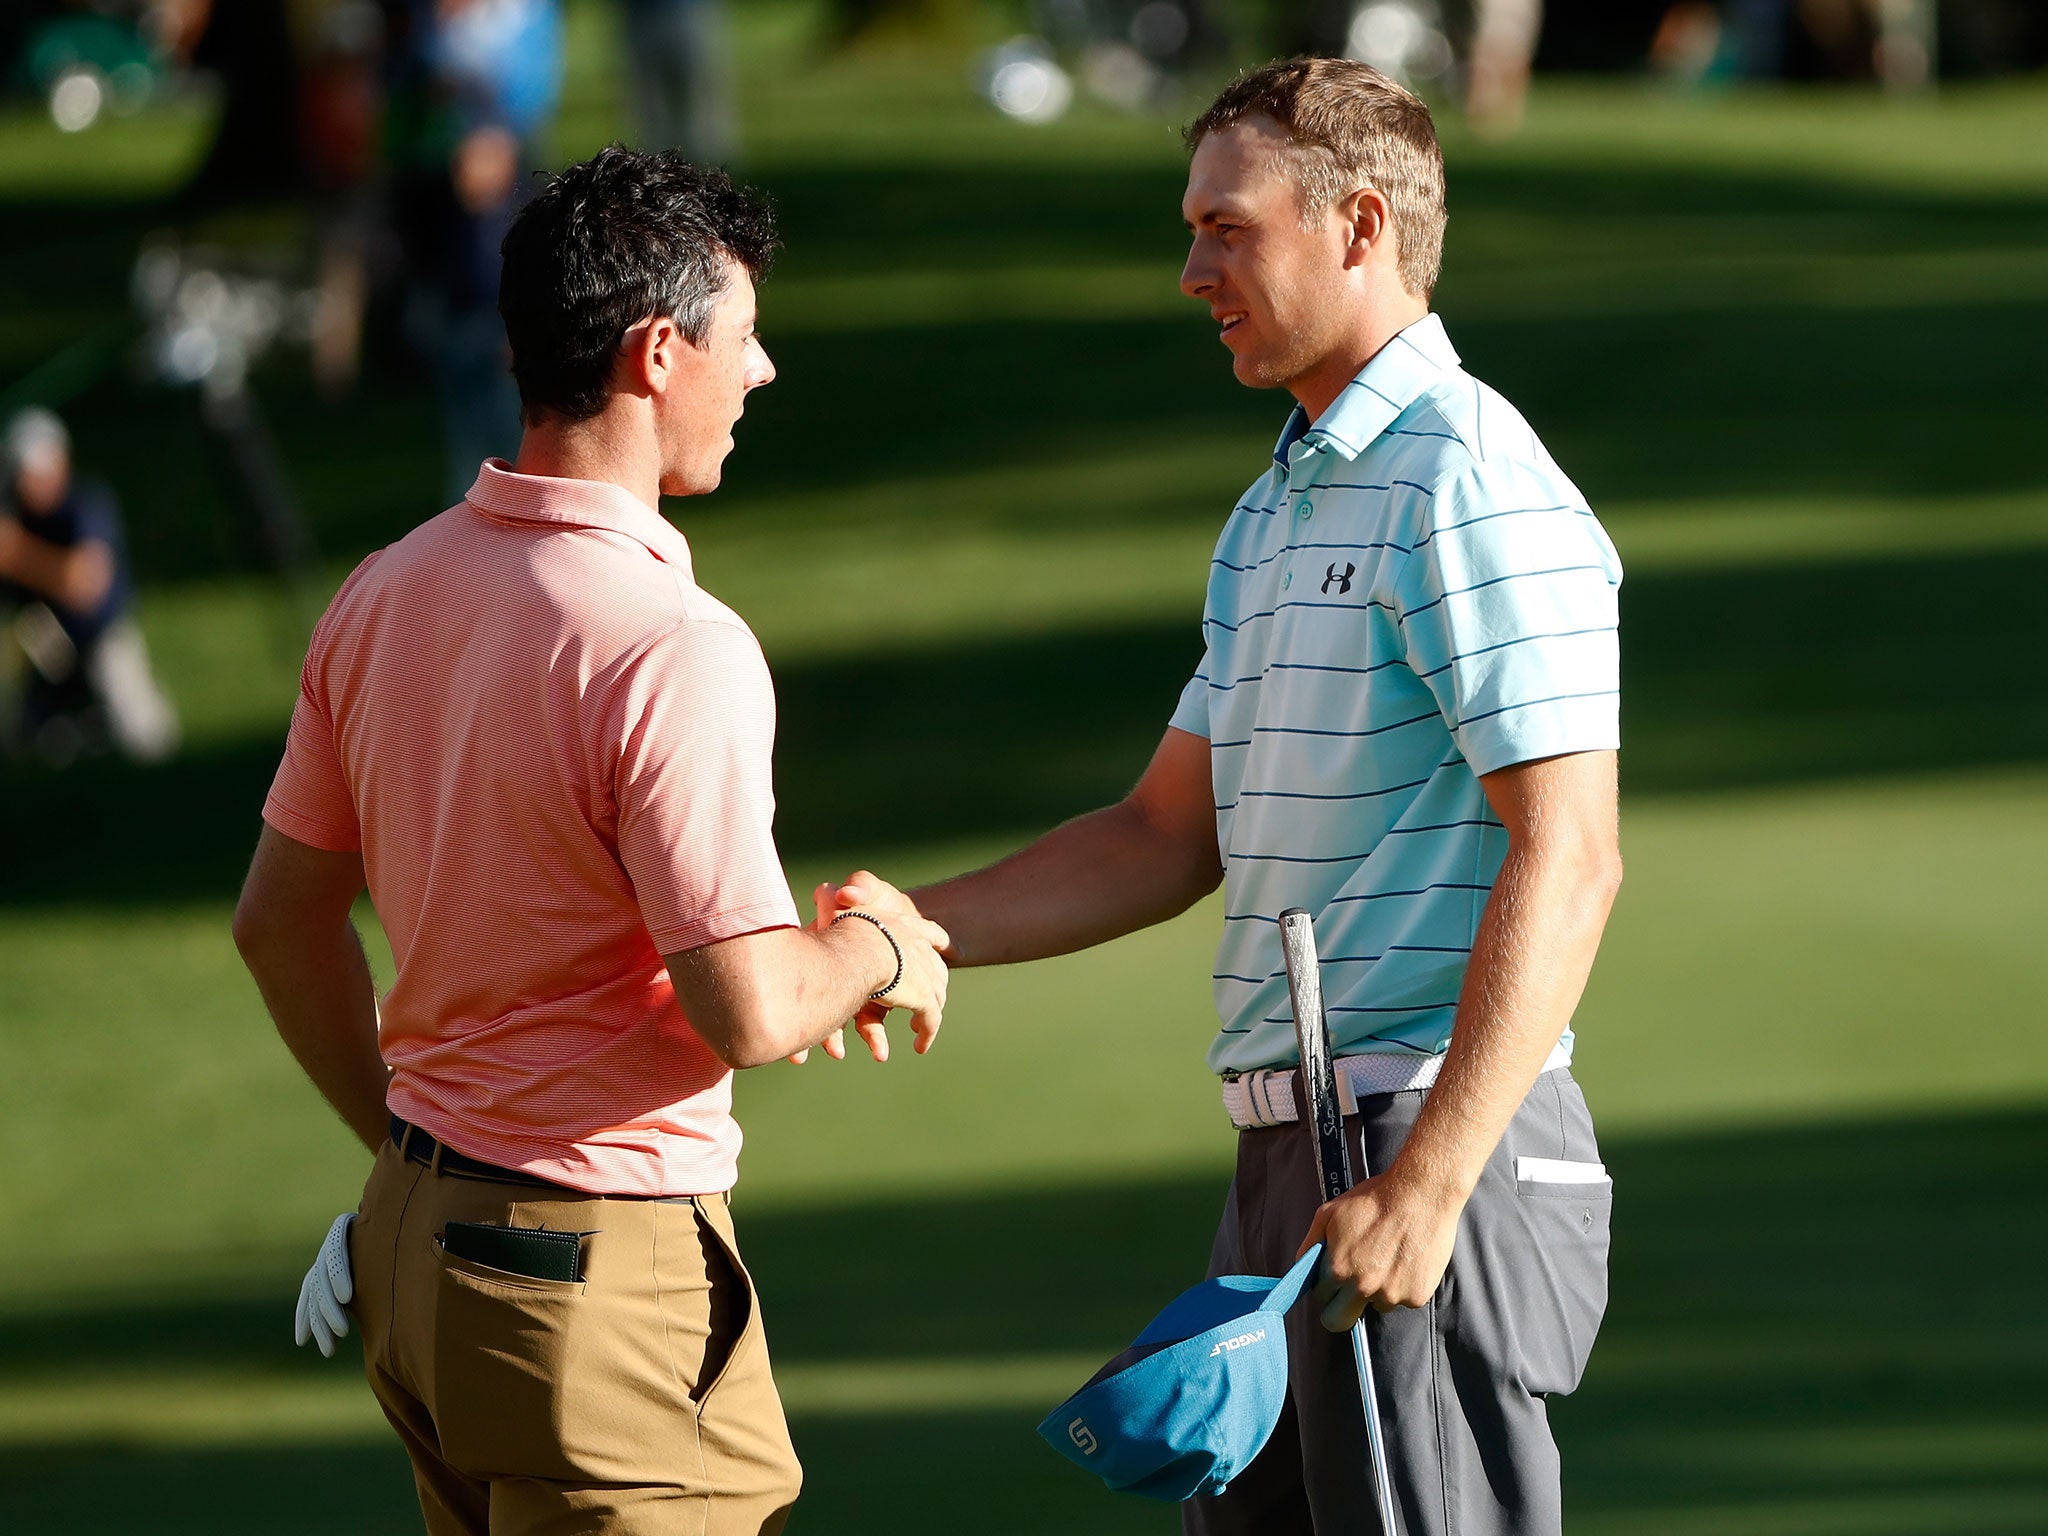 Rory McIlroy believes Jordan Spieth's ability to fight from anywhere is what makes him a true great